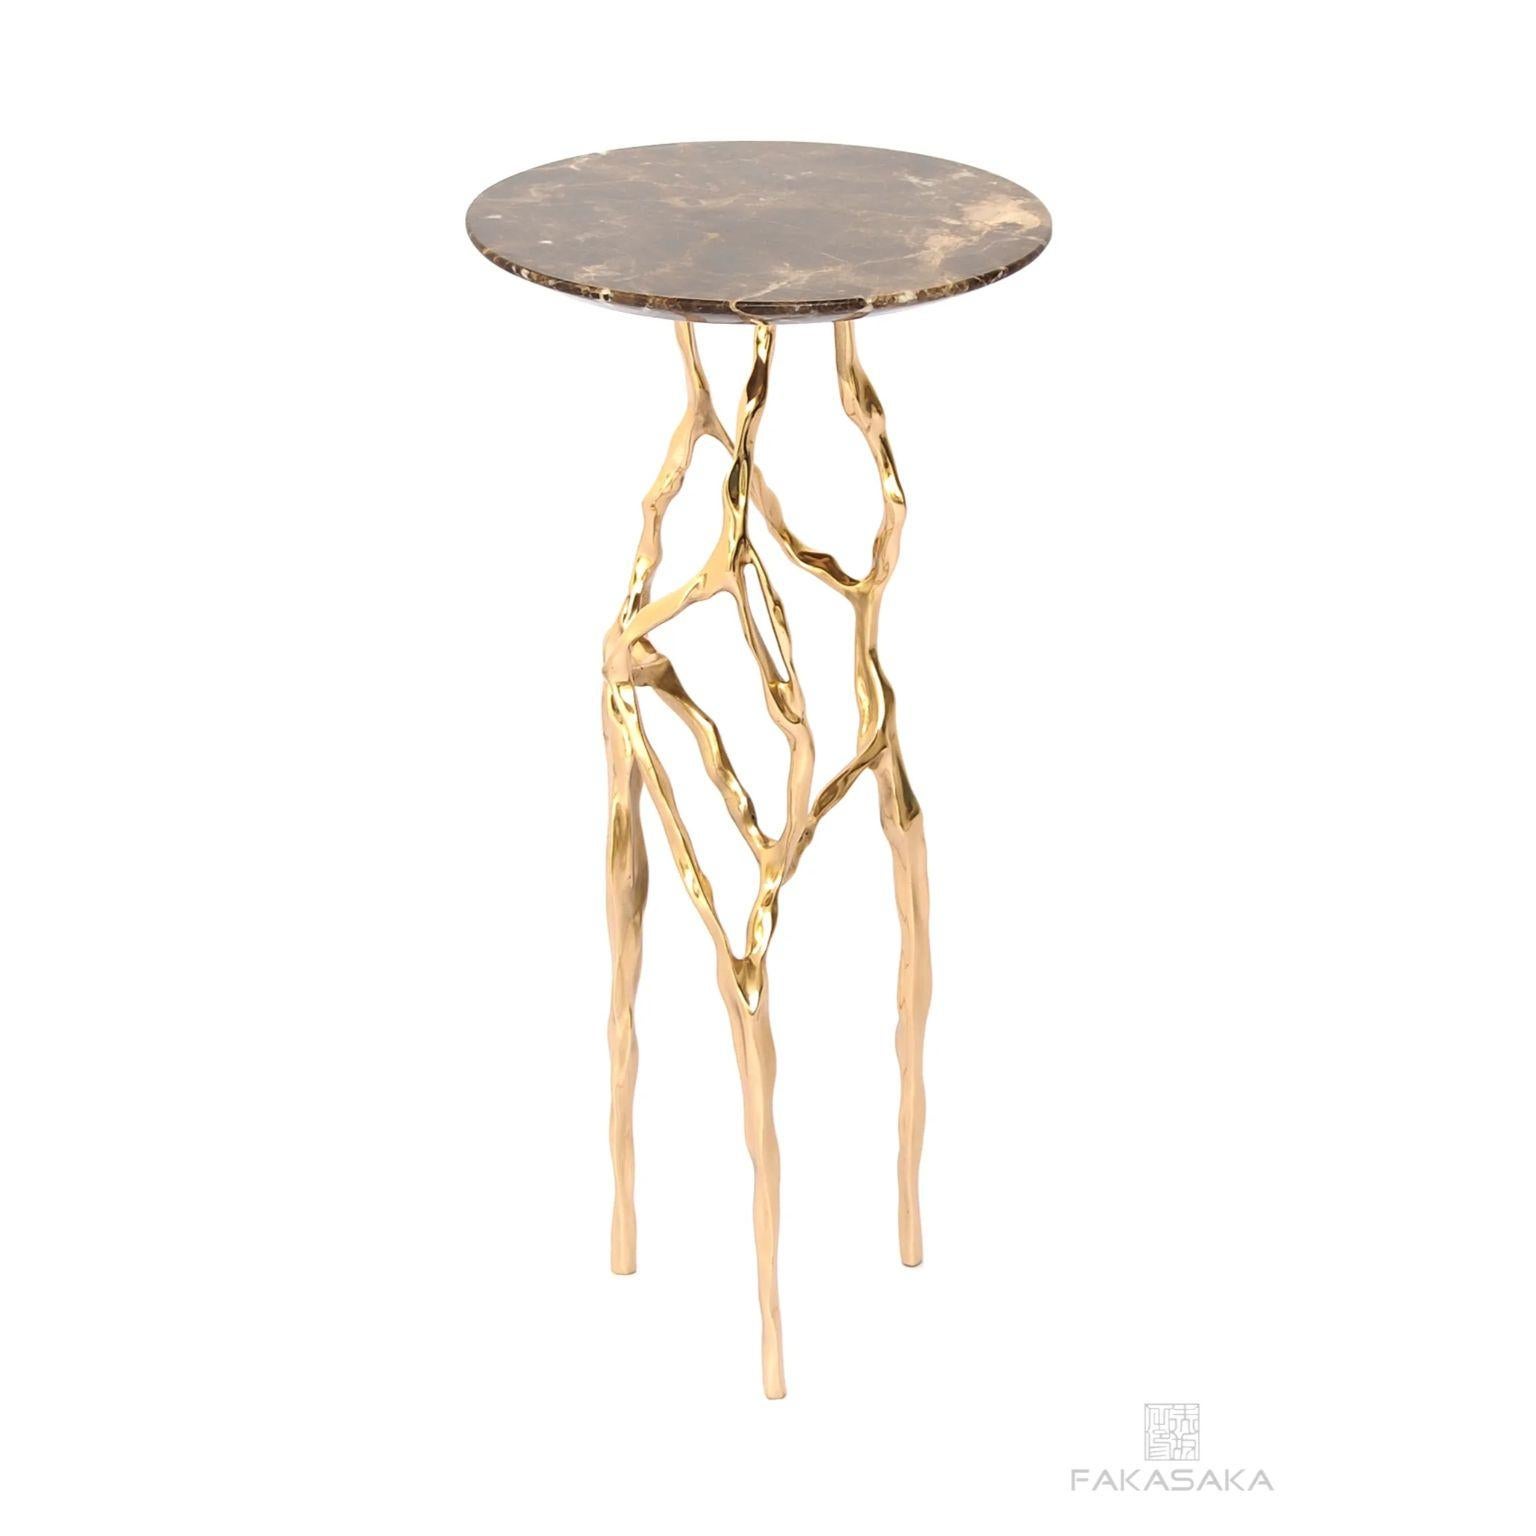 Other Sid Drink Table with Marrom Imperial Marble Top by Fakasaka Design For Sale